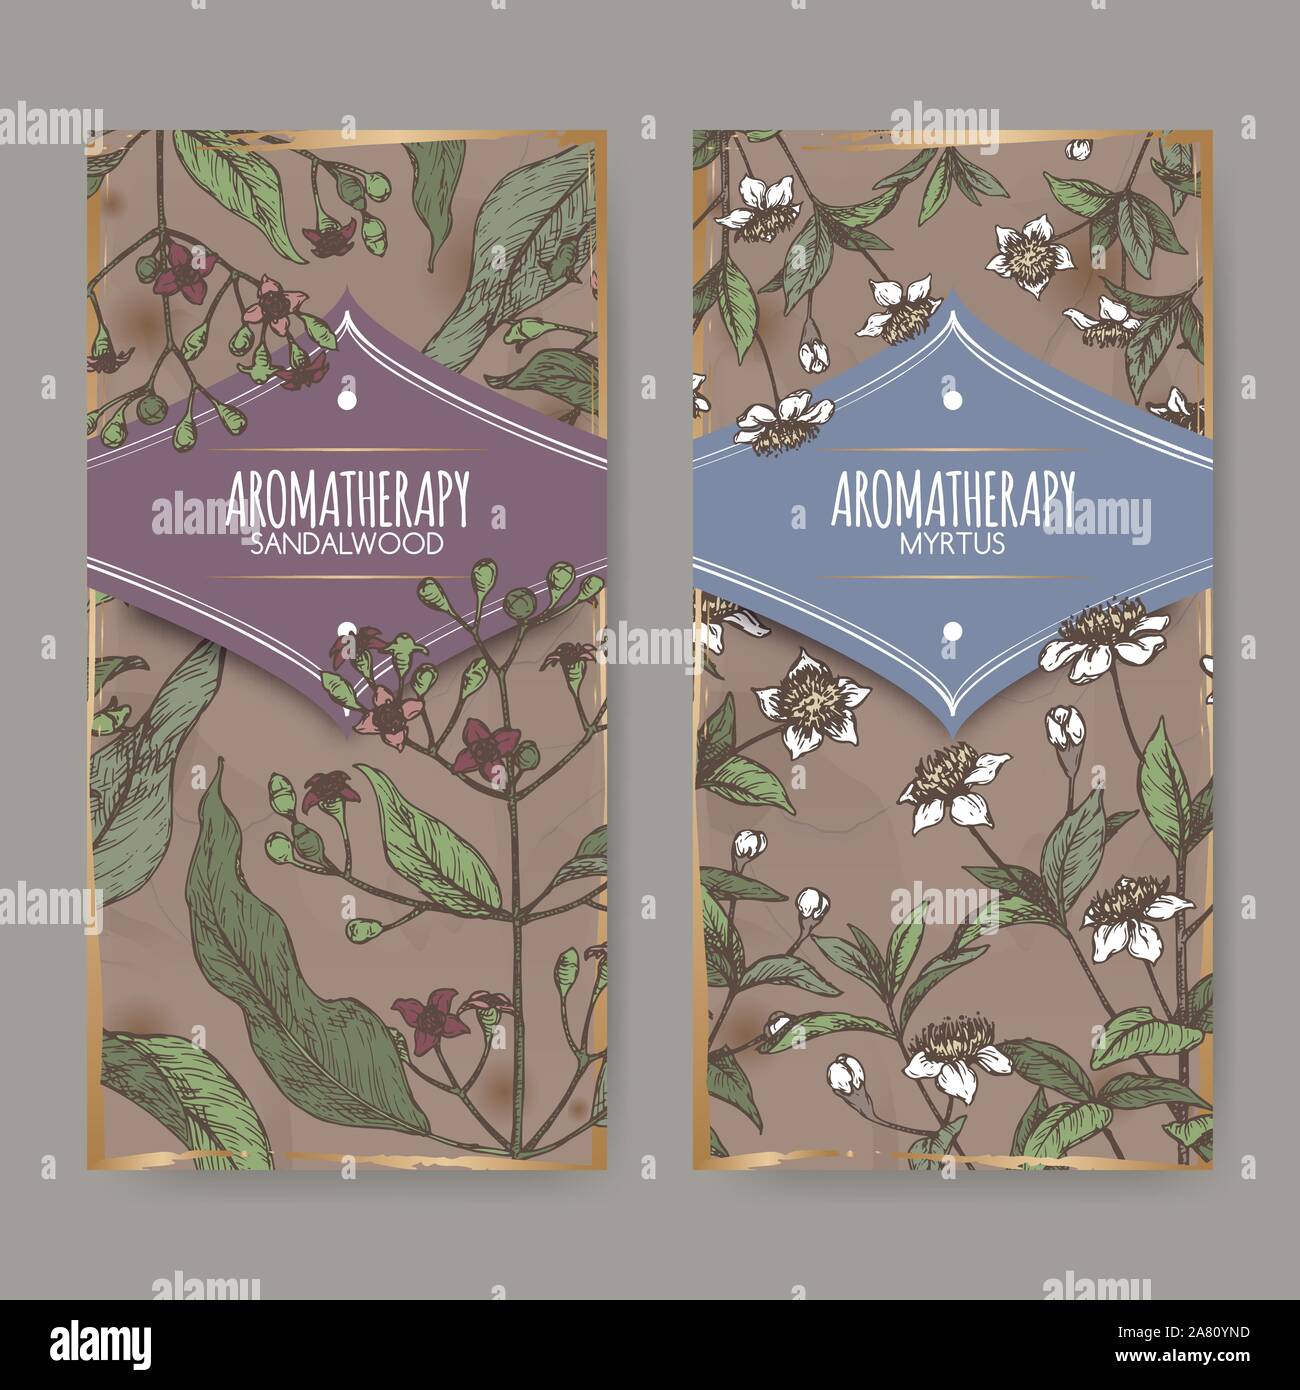 Two labels with Common myrtle aka Myrtus communis and Indian sandalwood aka Santalum album color sketch on vintage background. Great for traditional m Stock Vector